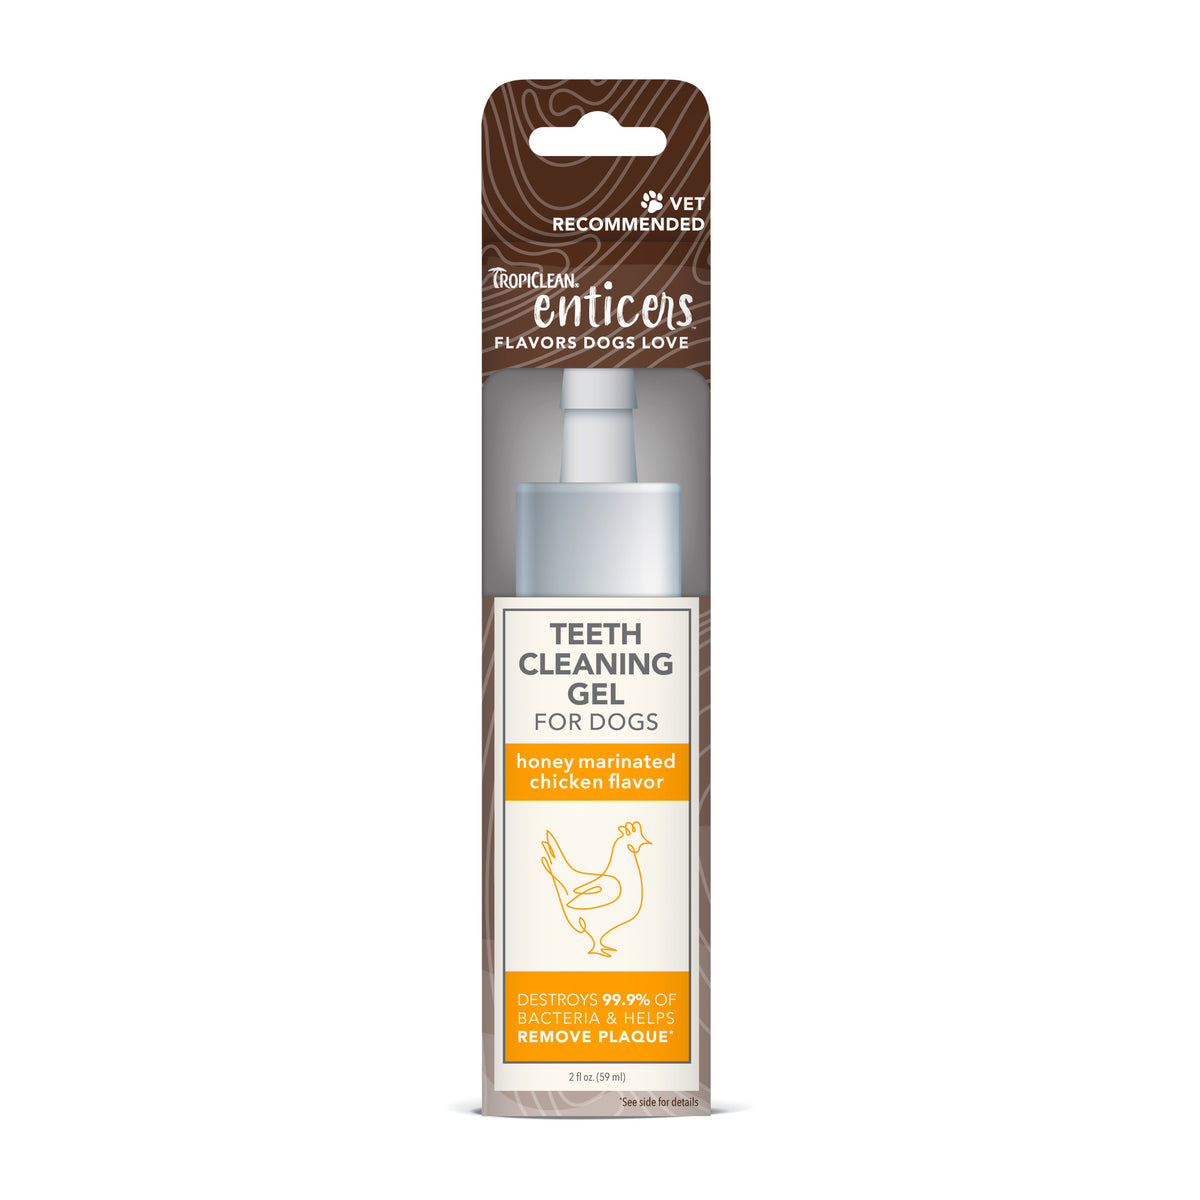 TropiClean Enticers Teeth Cleaning Gel for Dogs 59mL